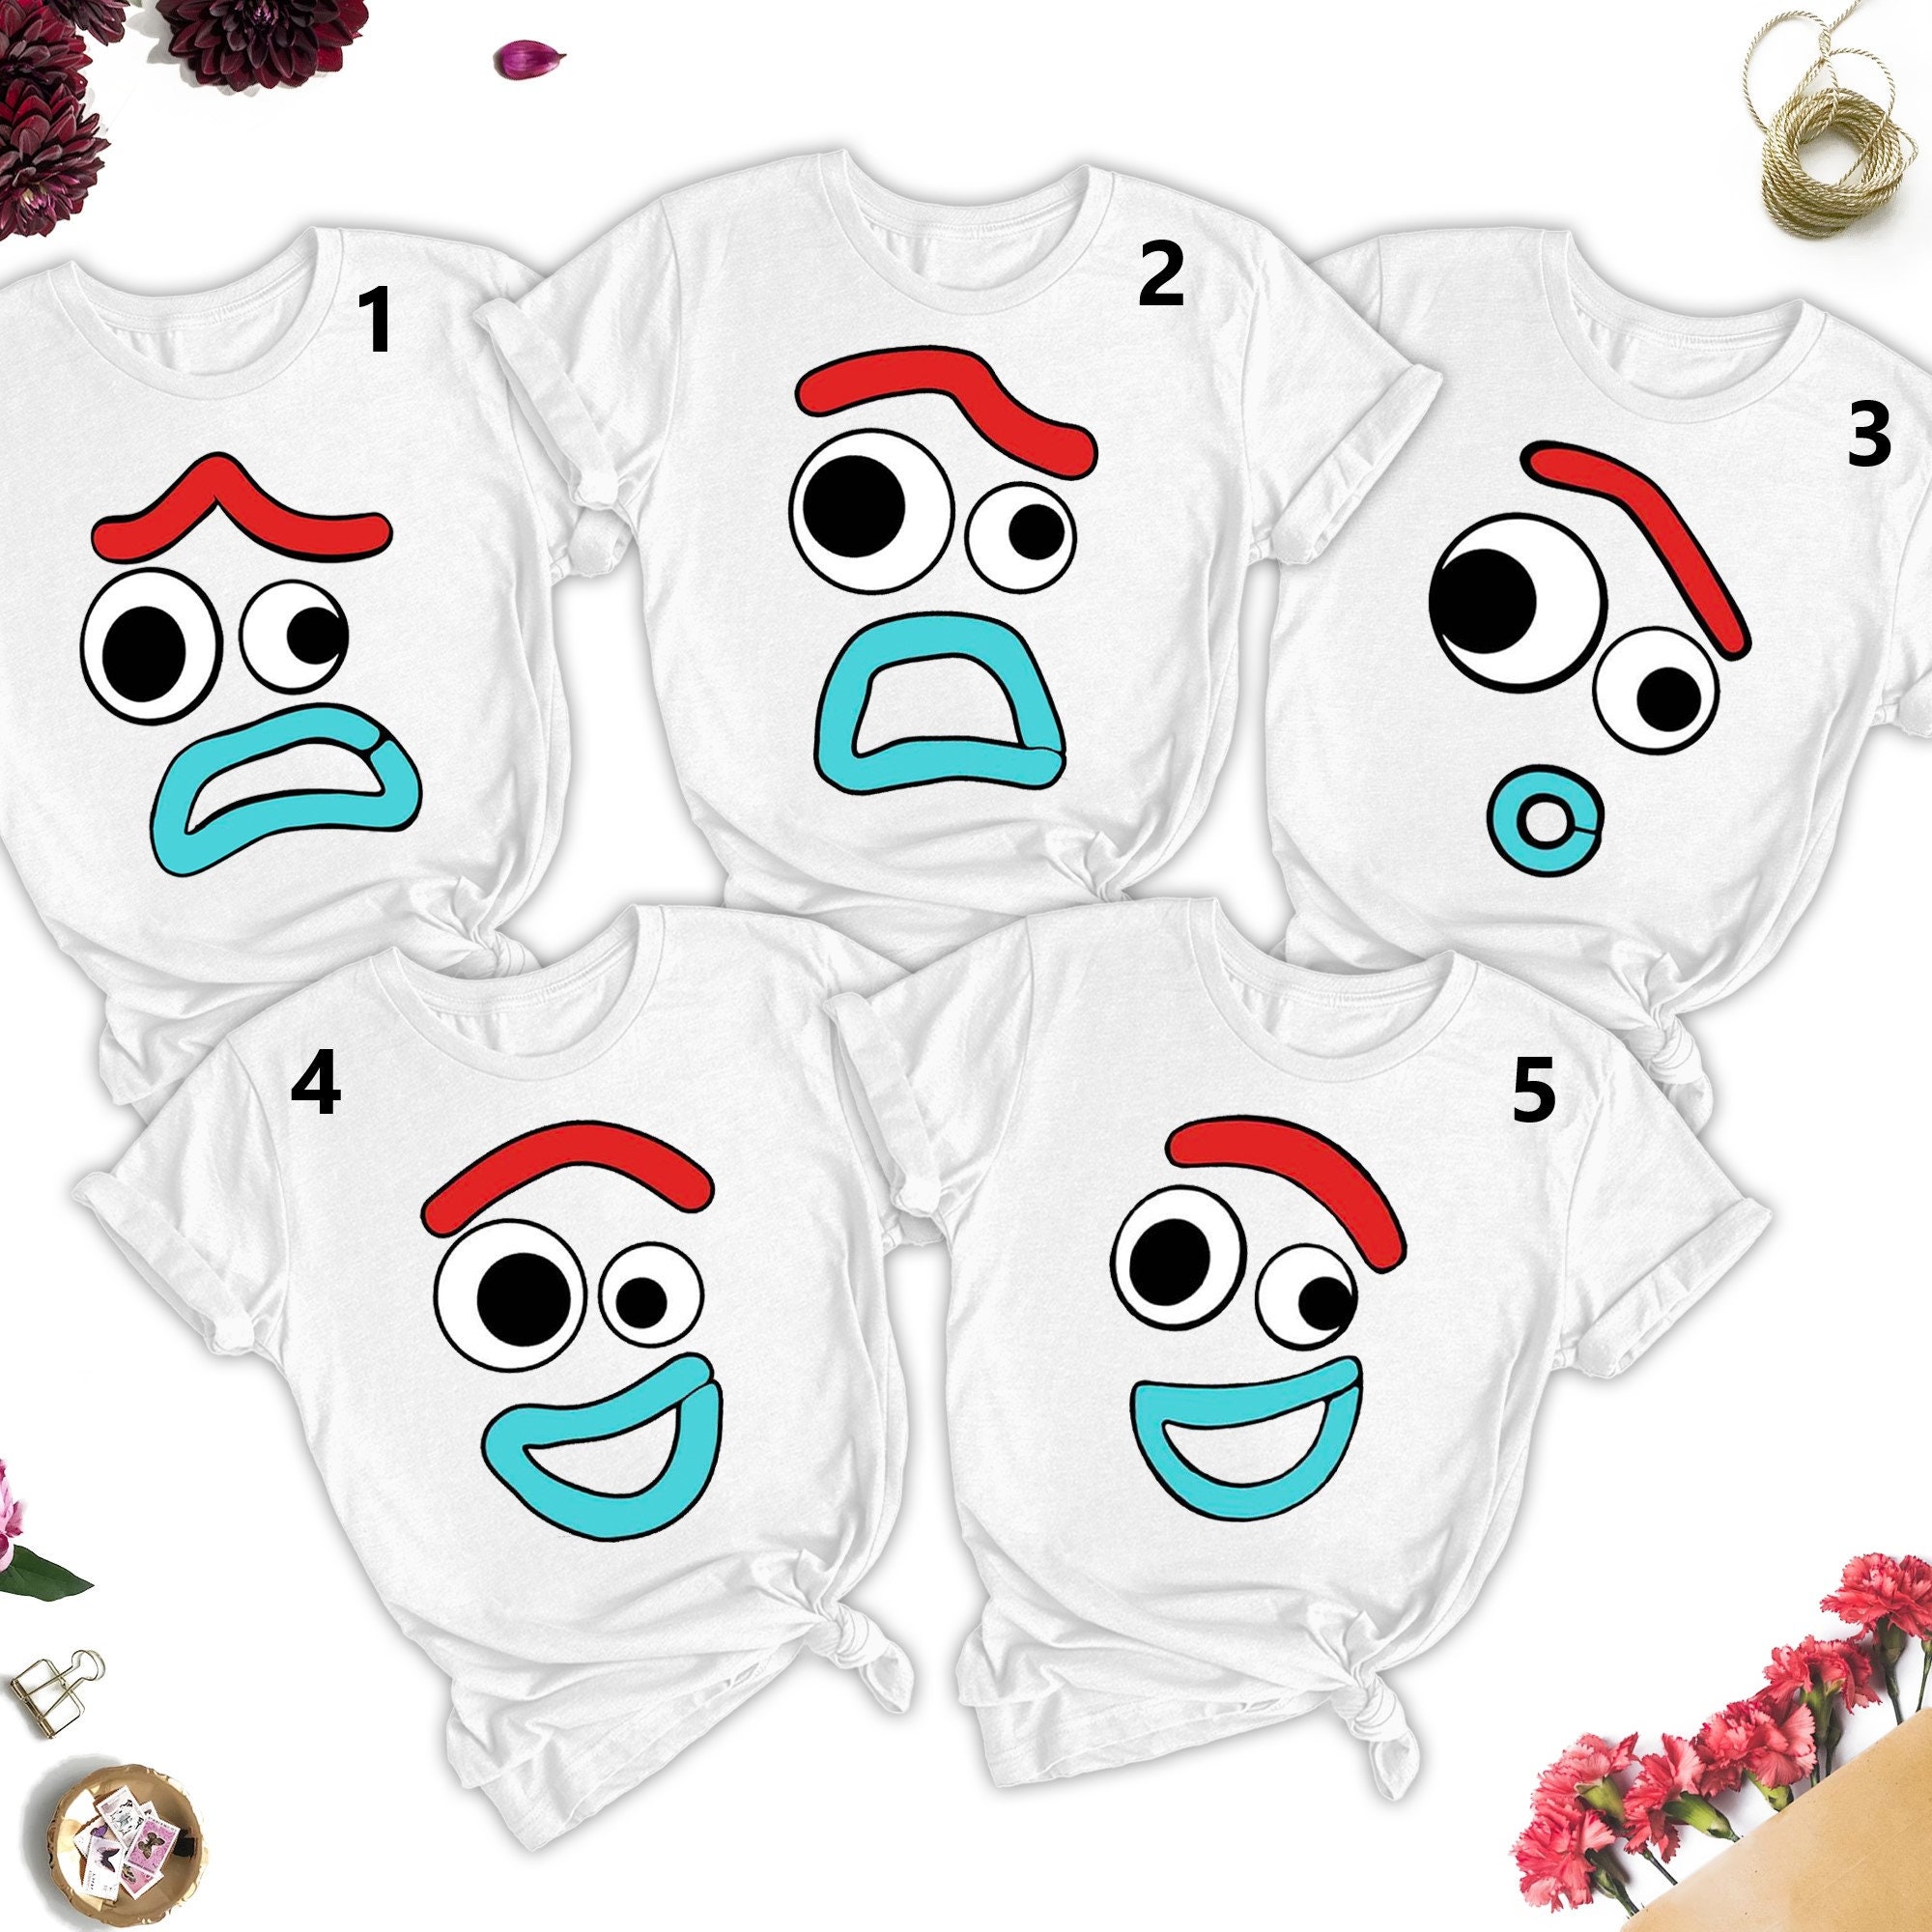 Discover Toy Face Costume Halloween Shirt, Toy Game Story Costume Shirt, Magic Toy Characters Cosplay Shirt, Halloween Party Family Matching Shirt